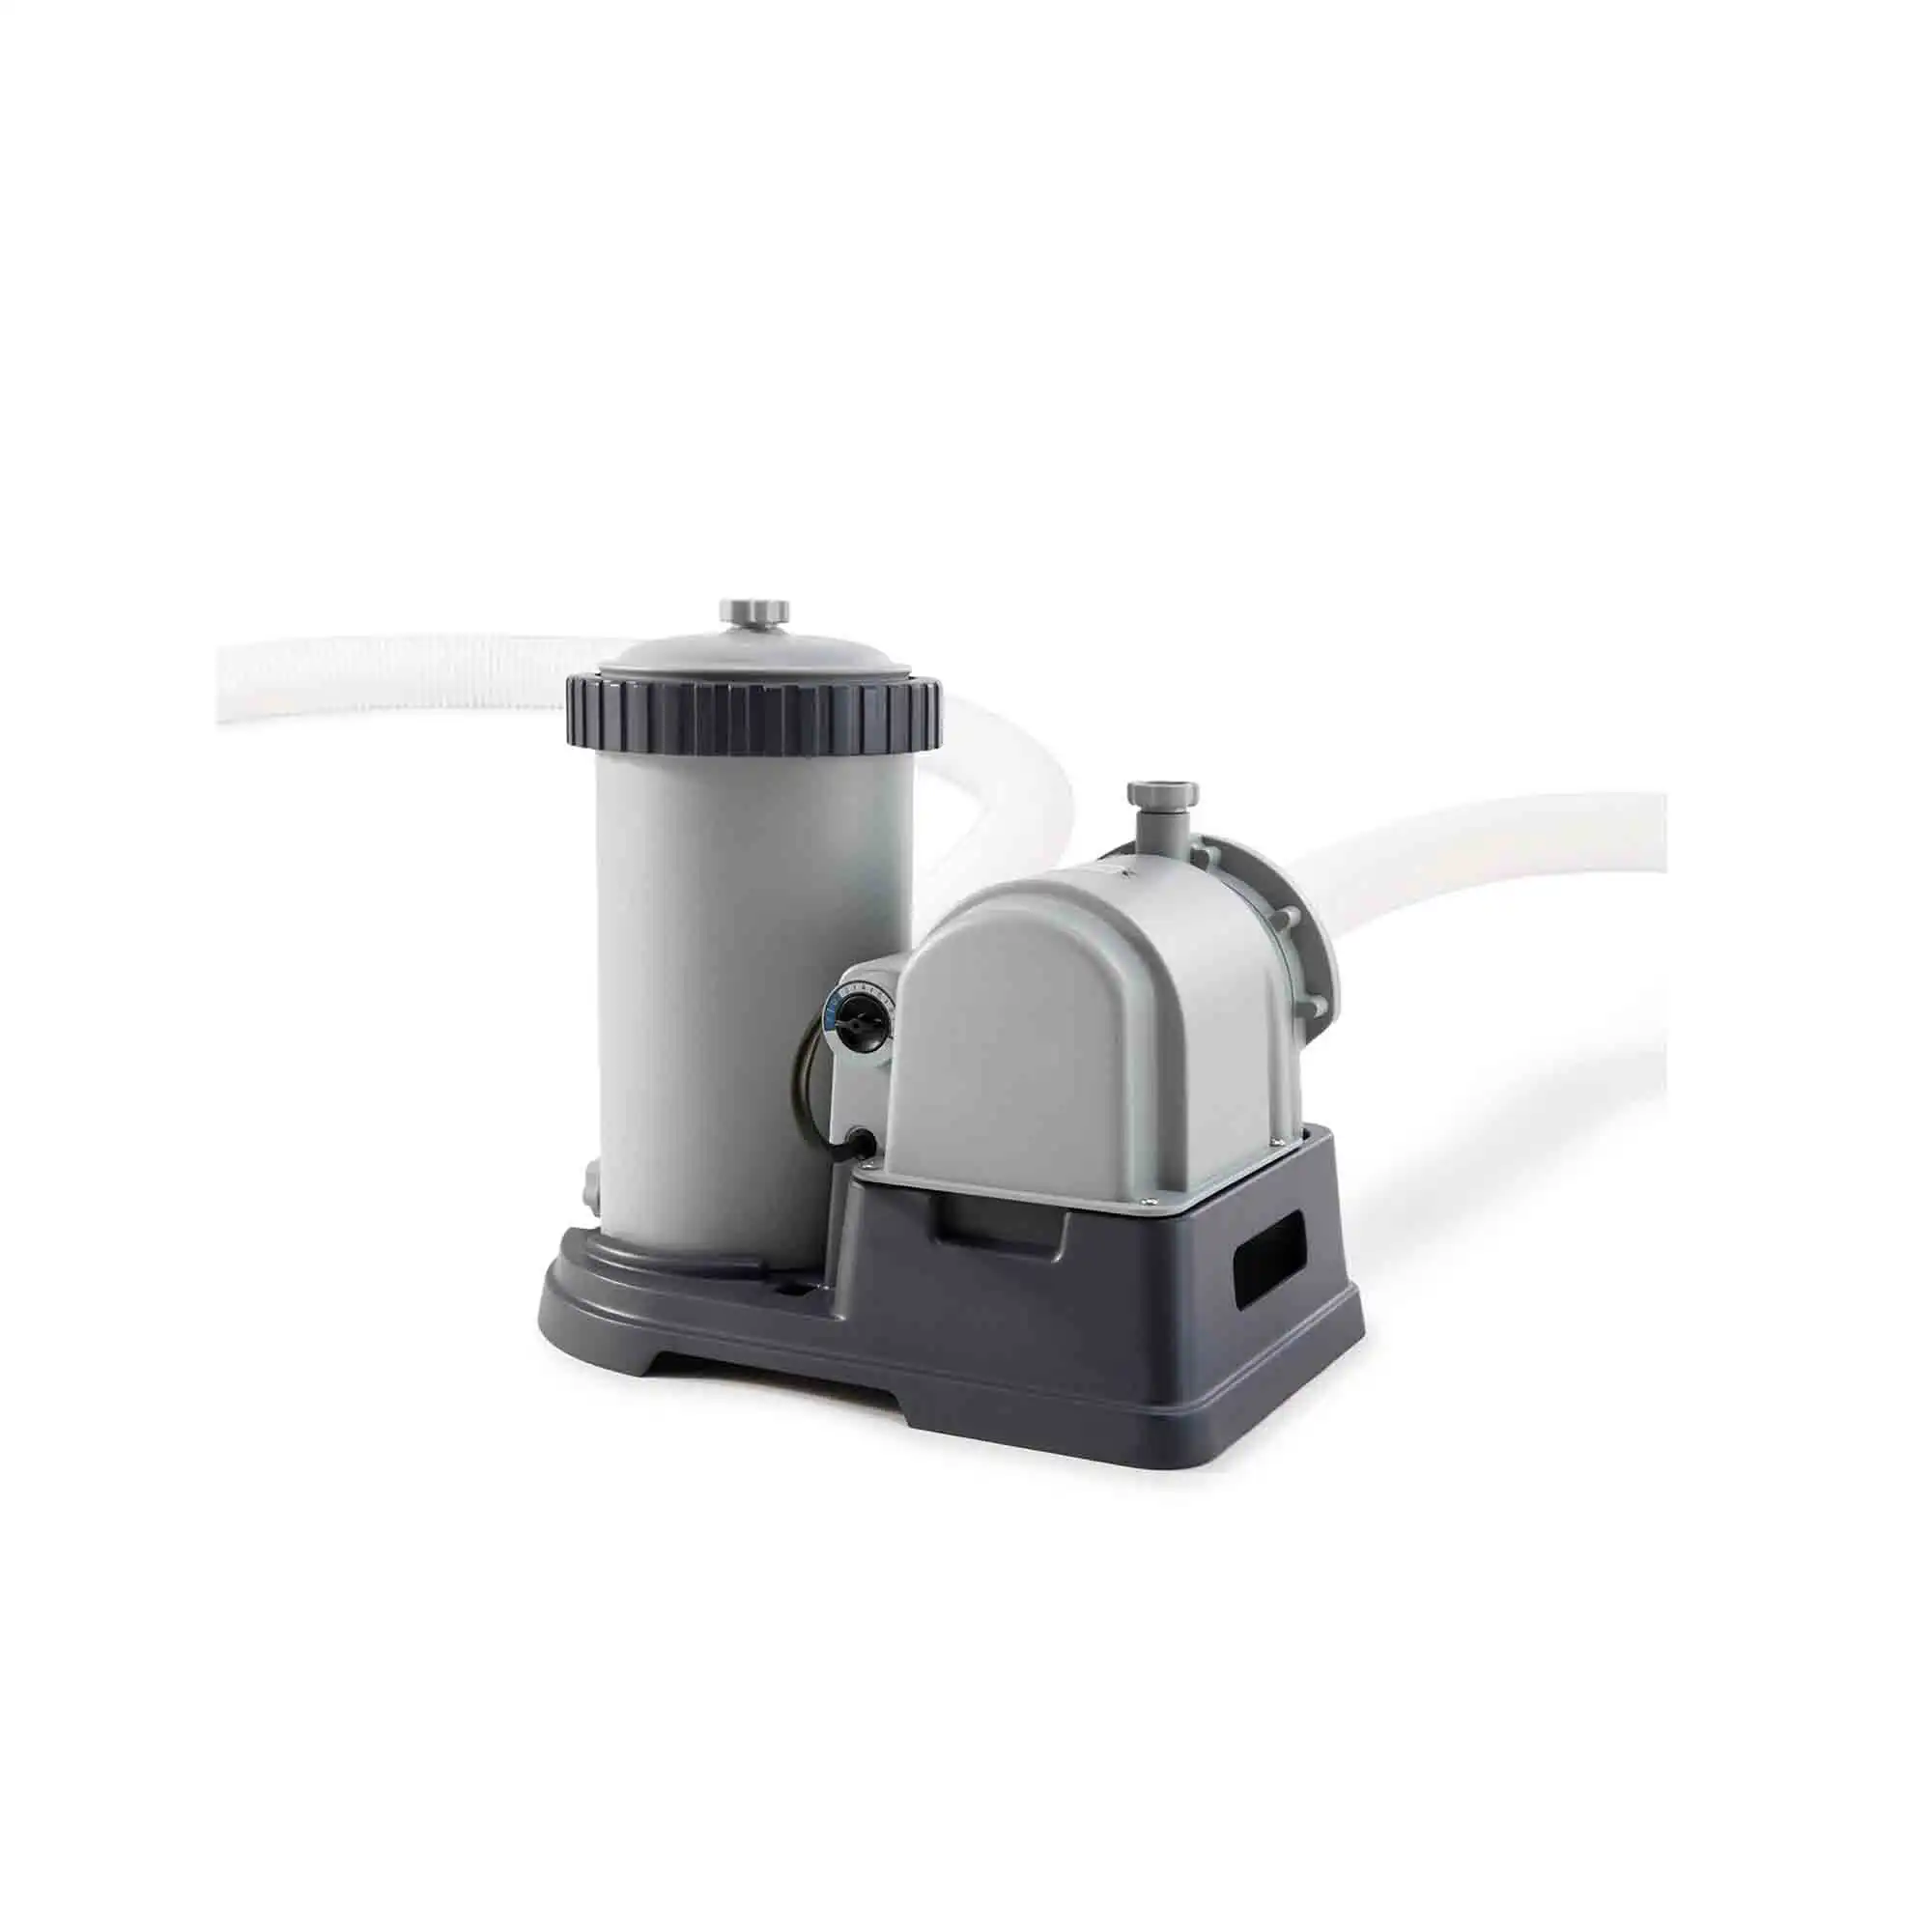 C2500 Cartridge Filter Pump with RCD (220-240 V)